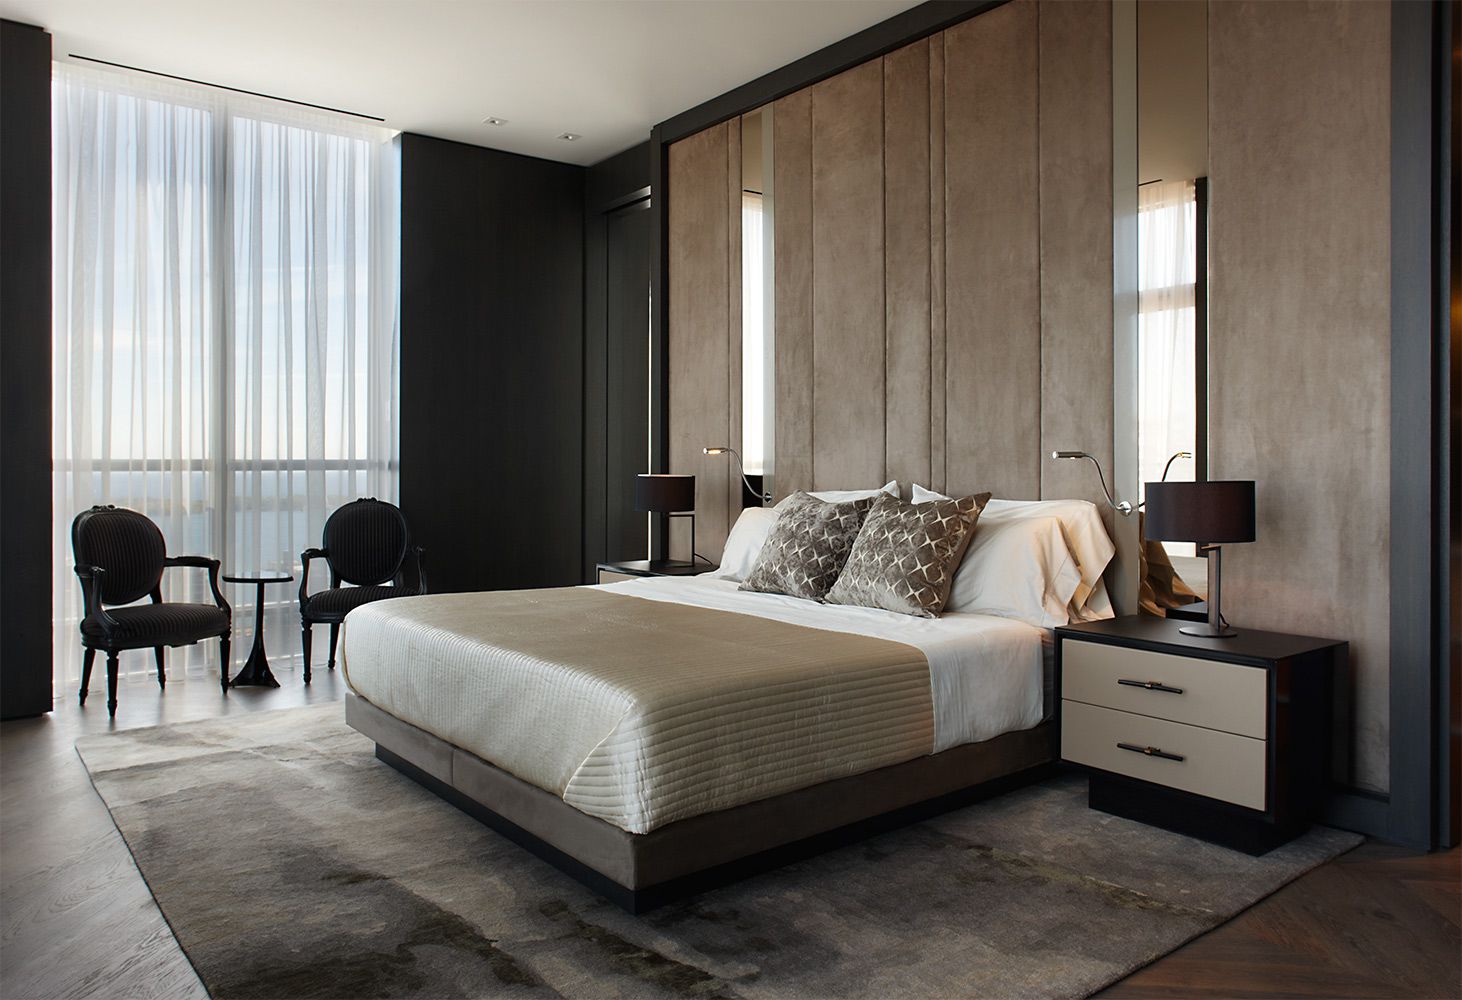 Contemporary penthouse design master bedroom